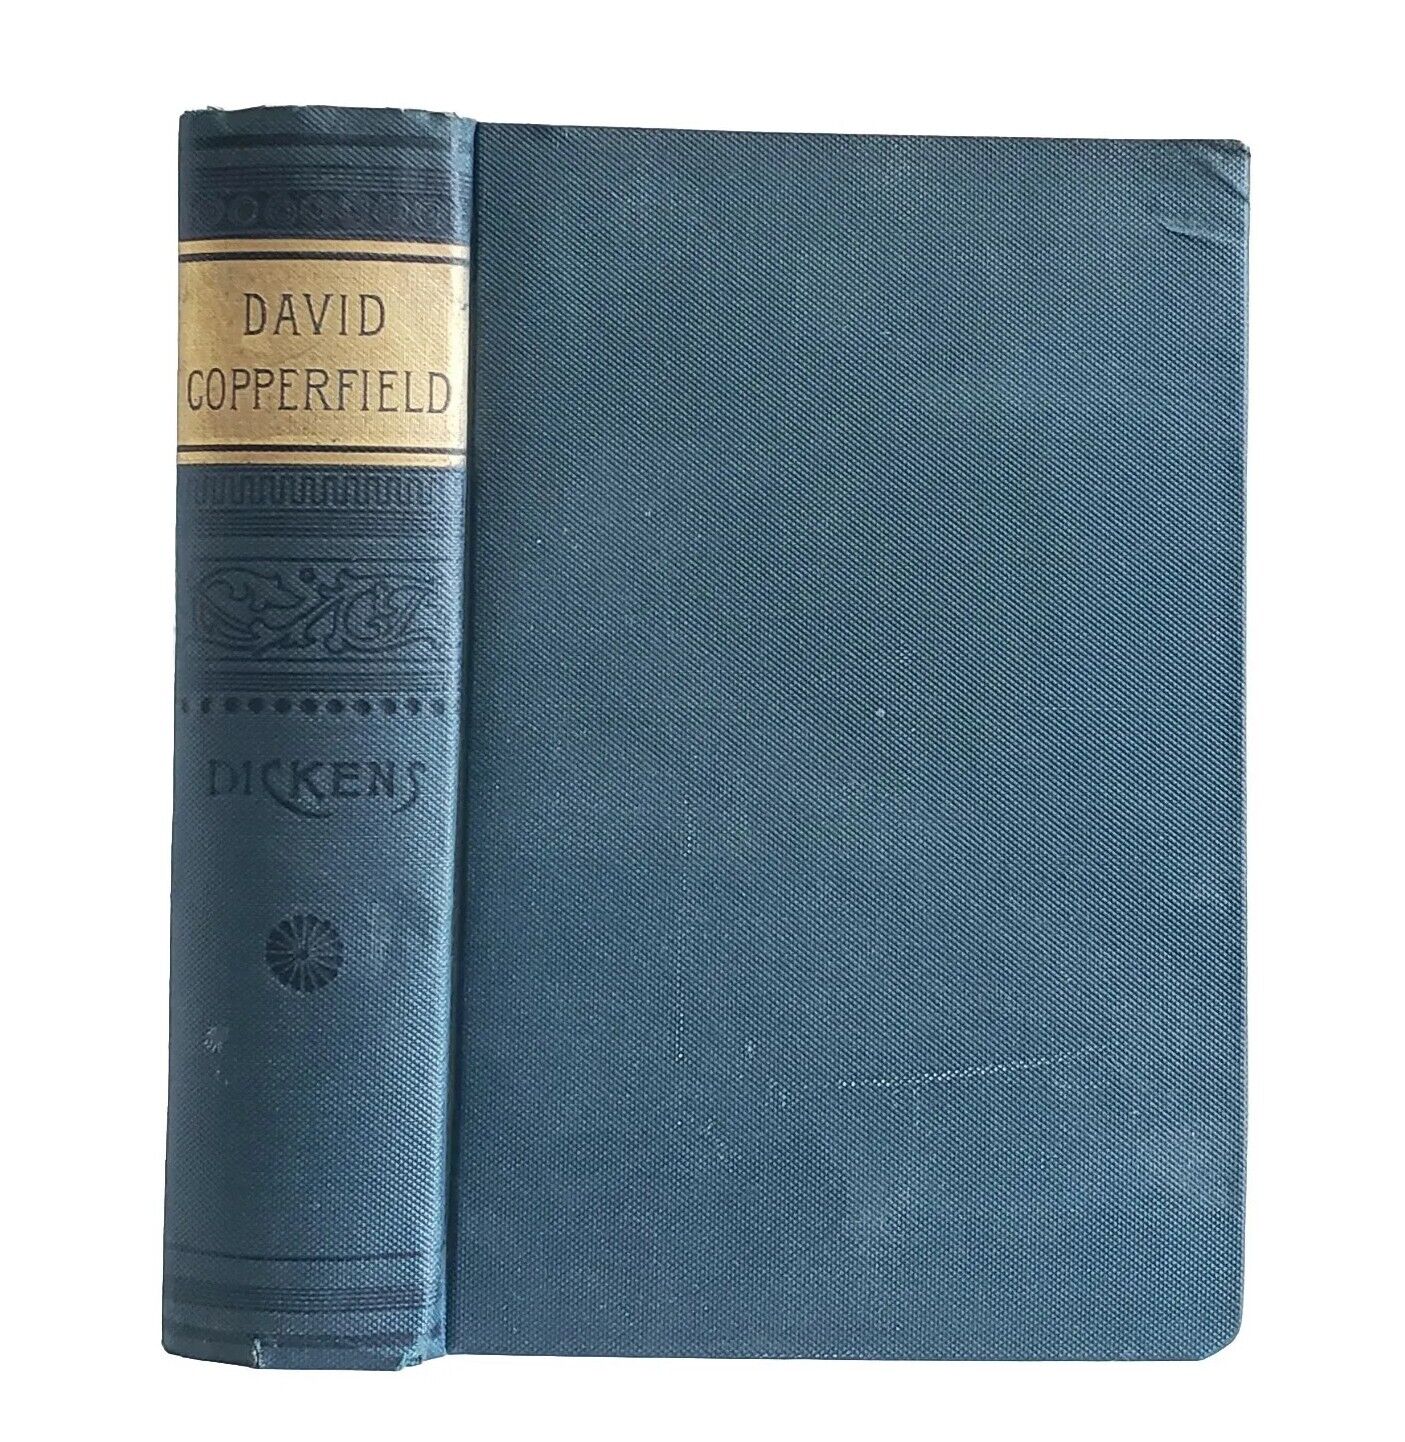 David Copperfield By Charles Dickens Antique Beloved Victorian Classic Novel